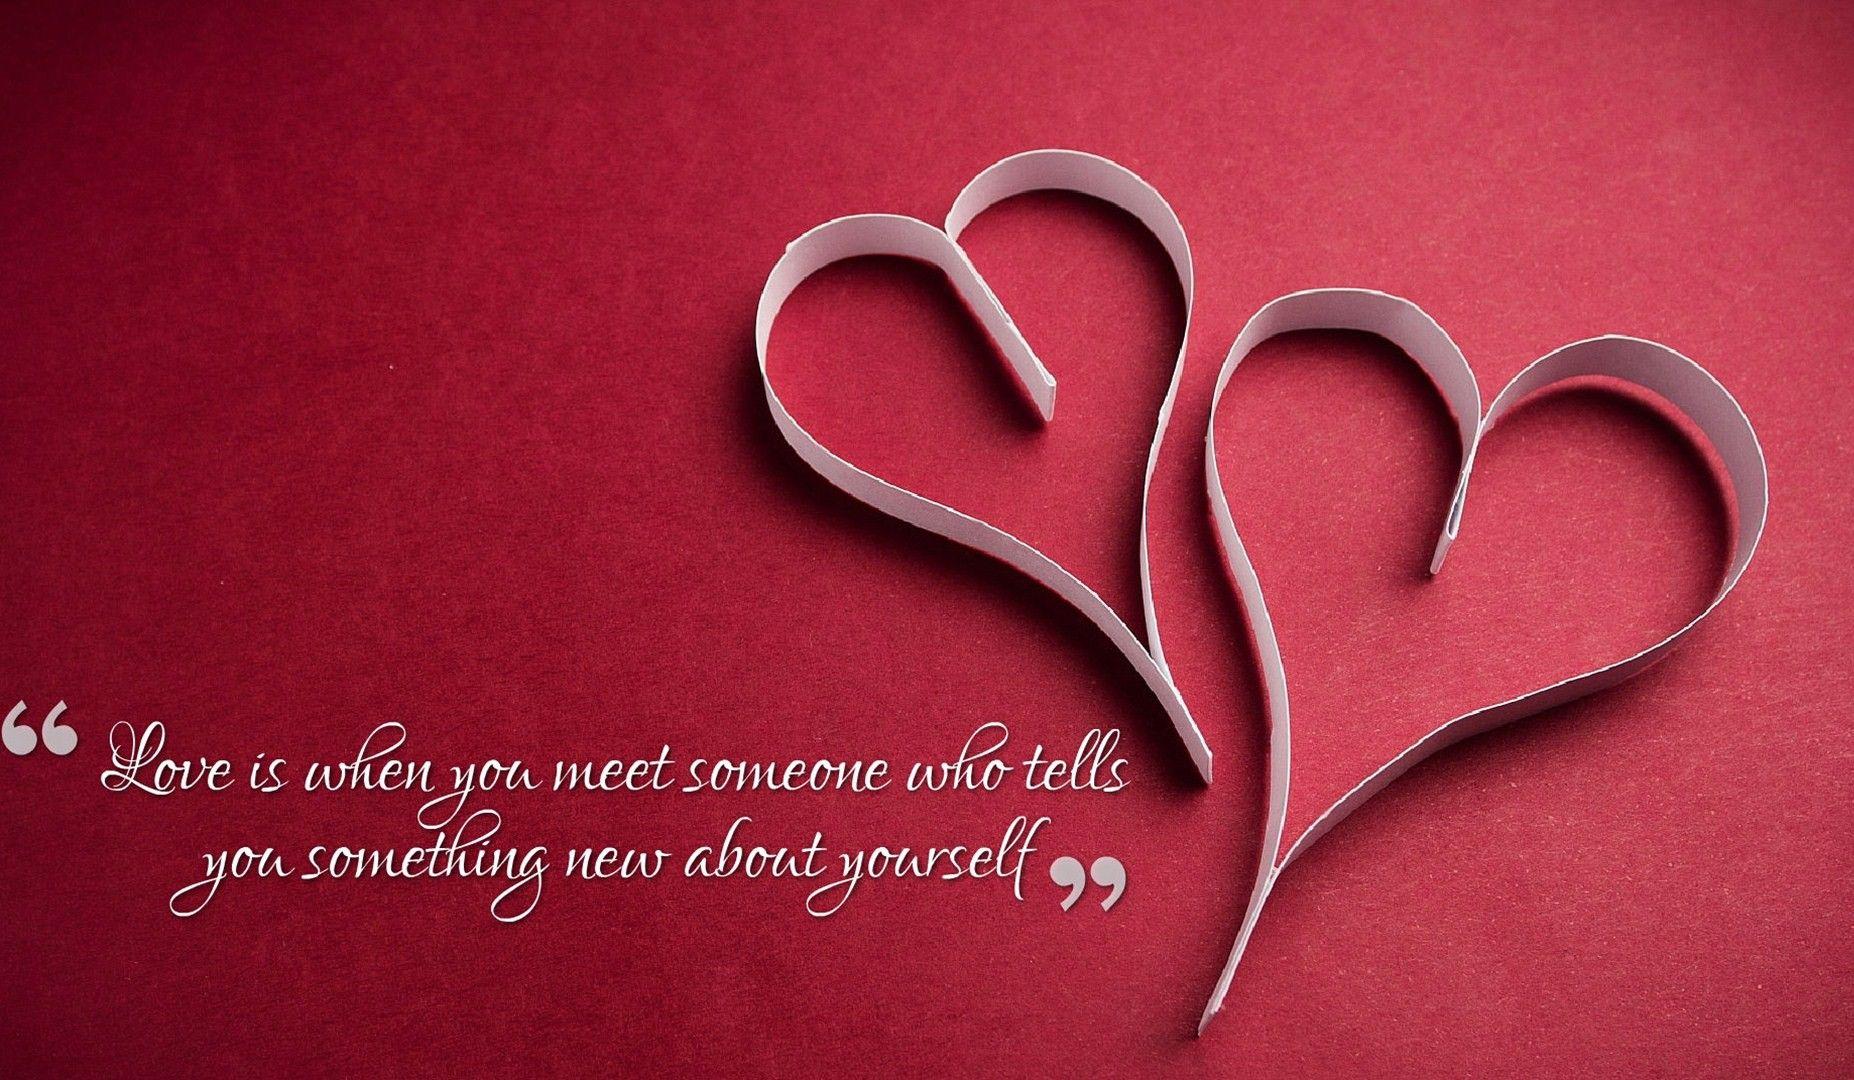 Nice Wallpaper with Quotes About Love